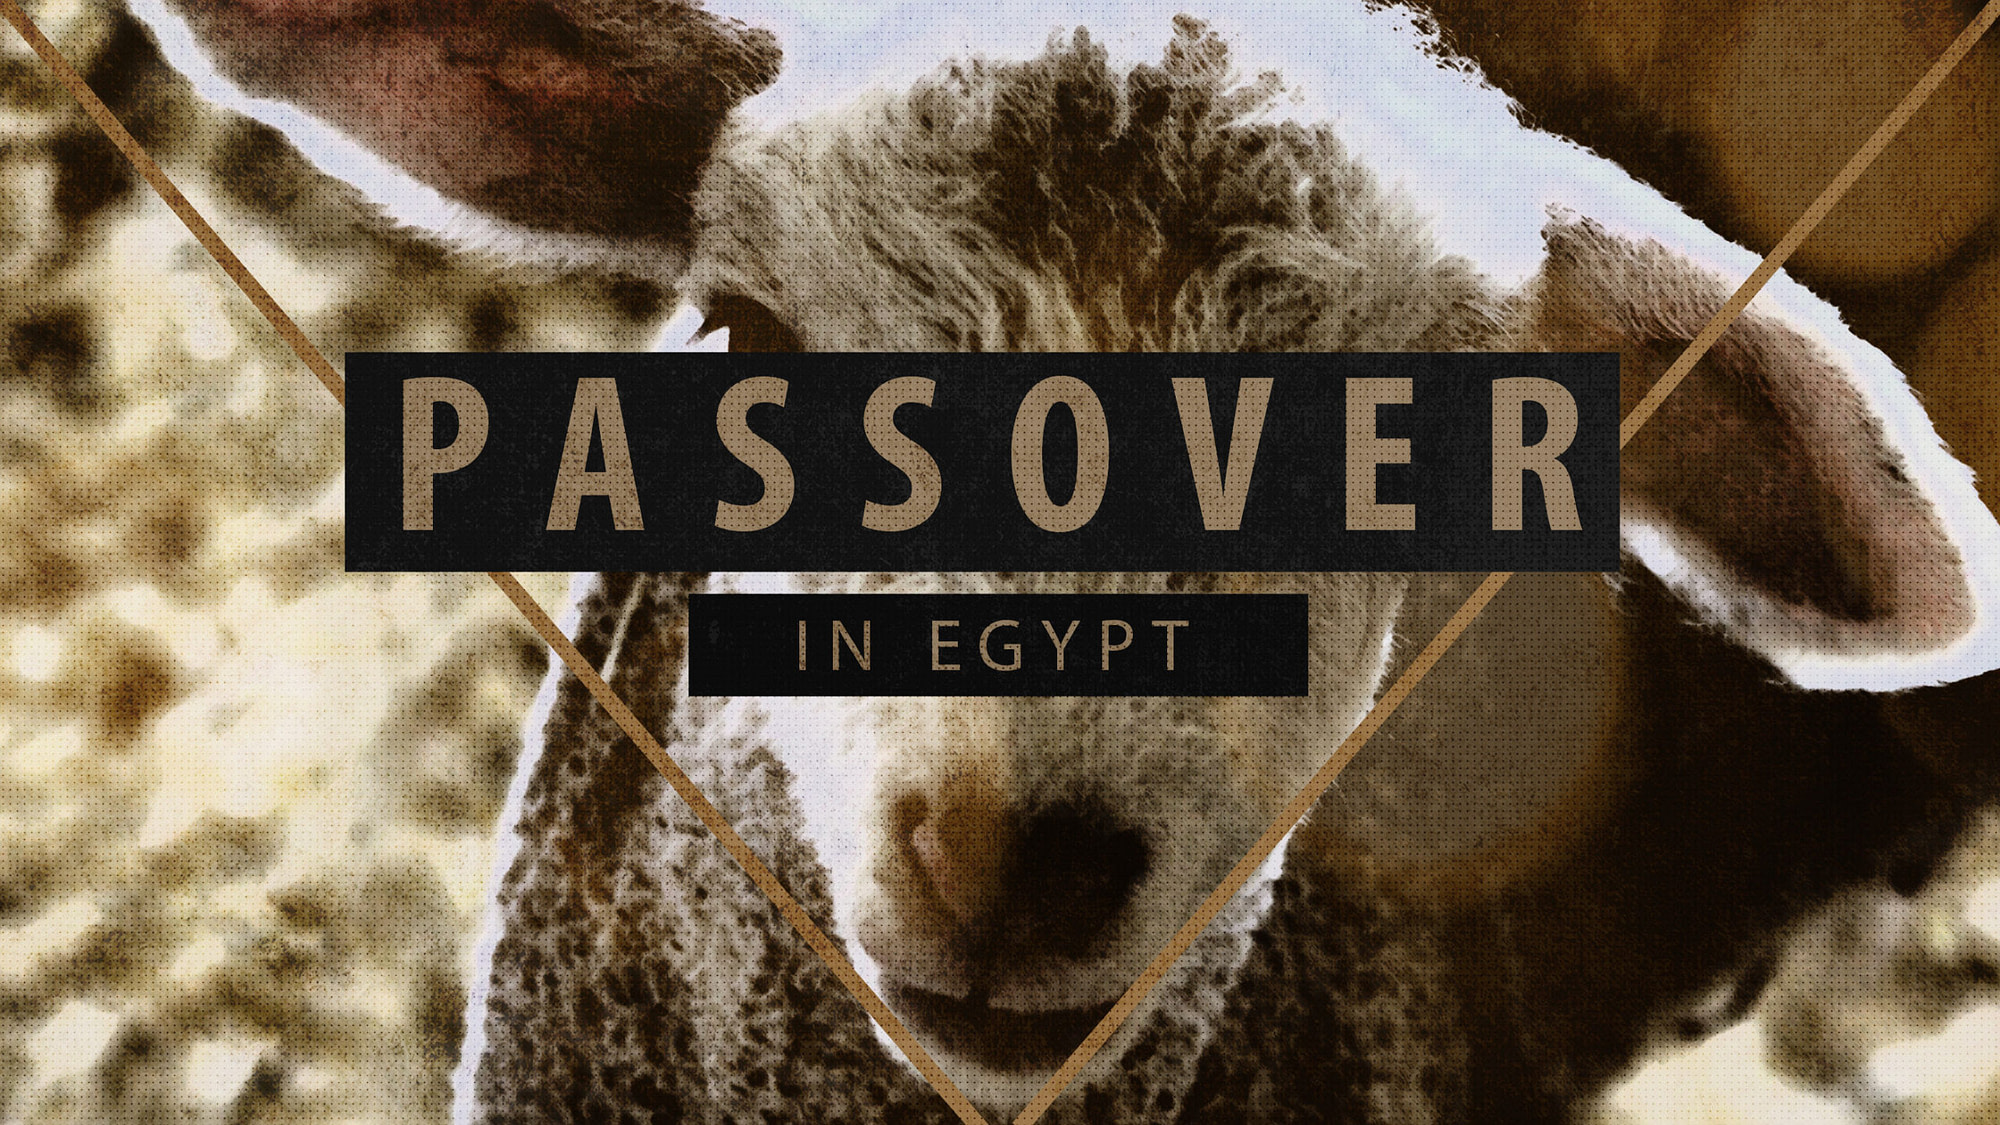 Passover in Egypt | Messianic Passover Teaching Series